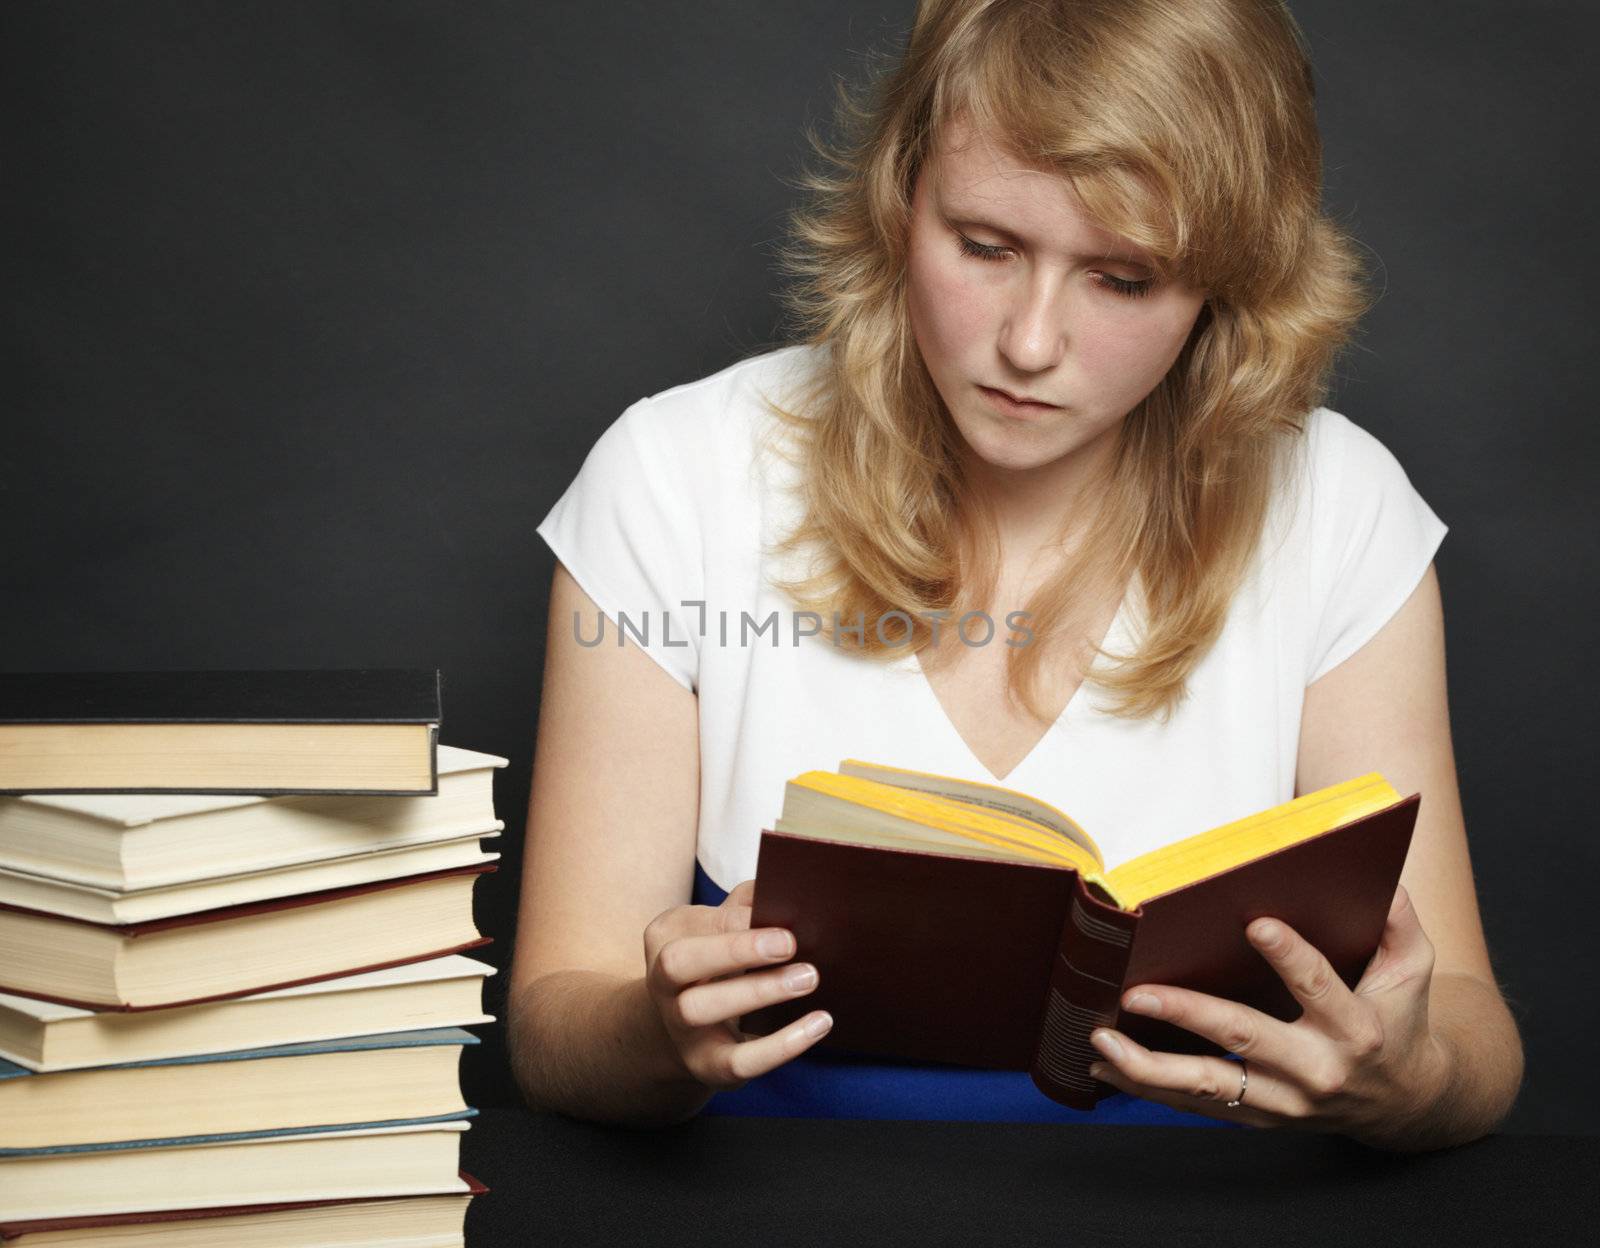 The young woman attentively reads the book against a dark background